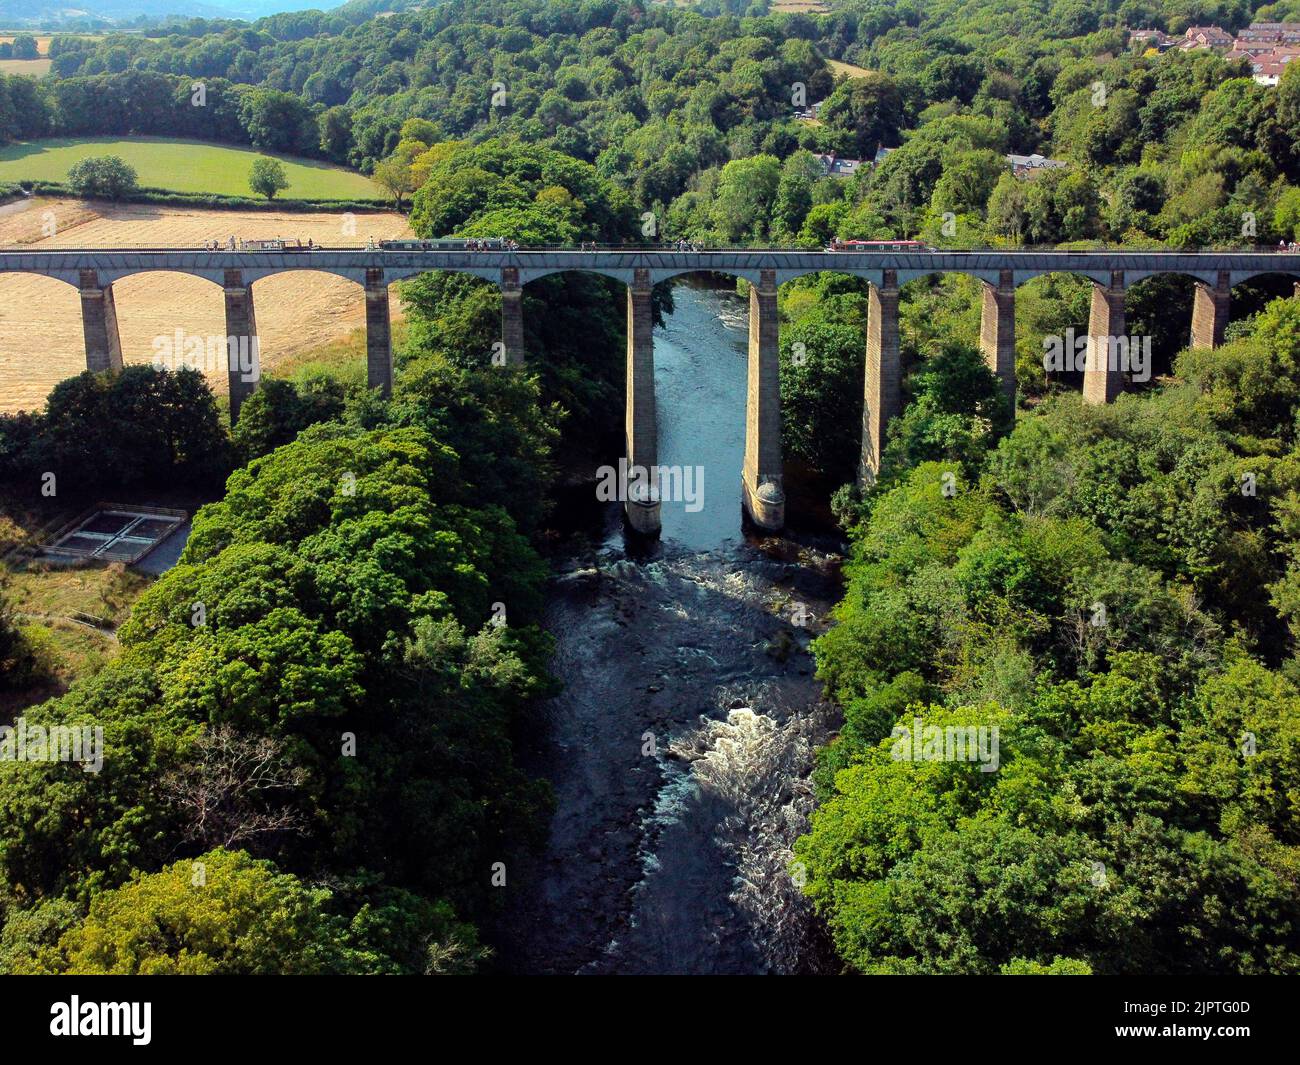 Aerial view of the Pontcysyllte Aqueduct that carries the Llangollen Canal across the River Dee in the Vale of Llangollen in northeast Wales. Stock Photo